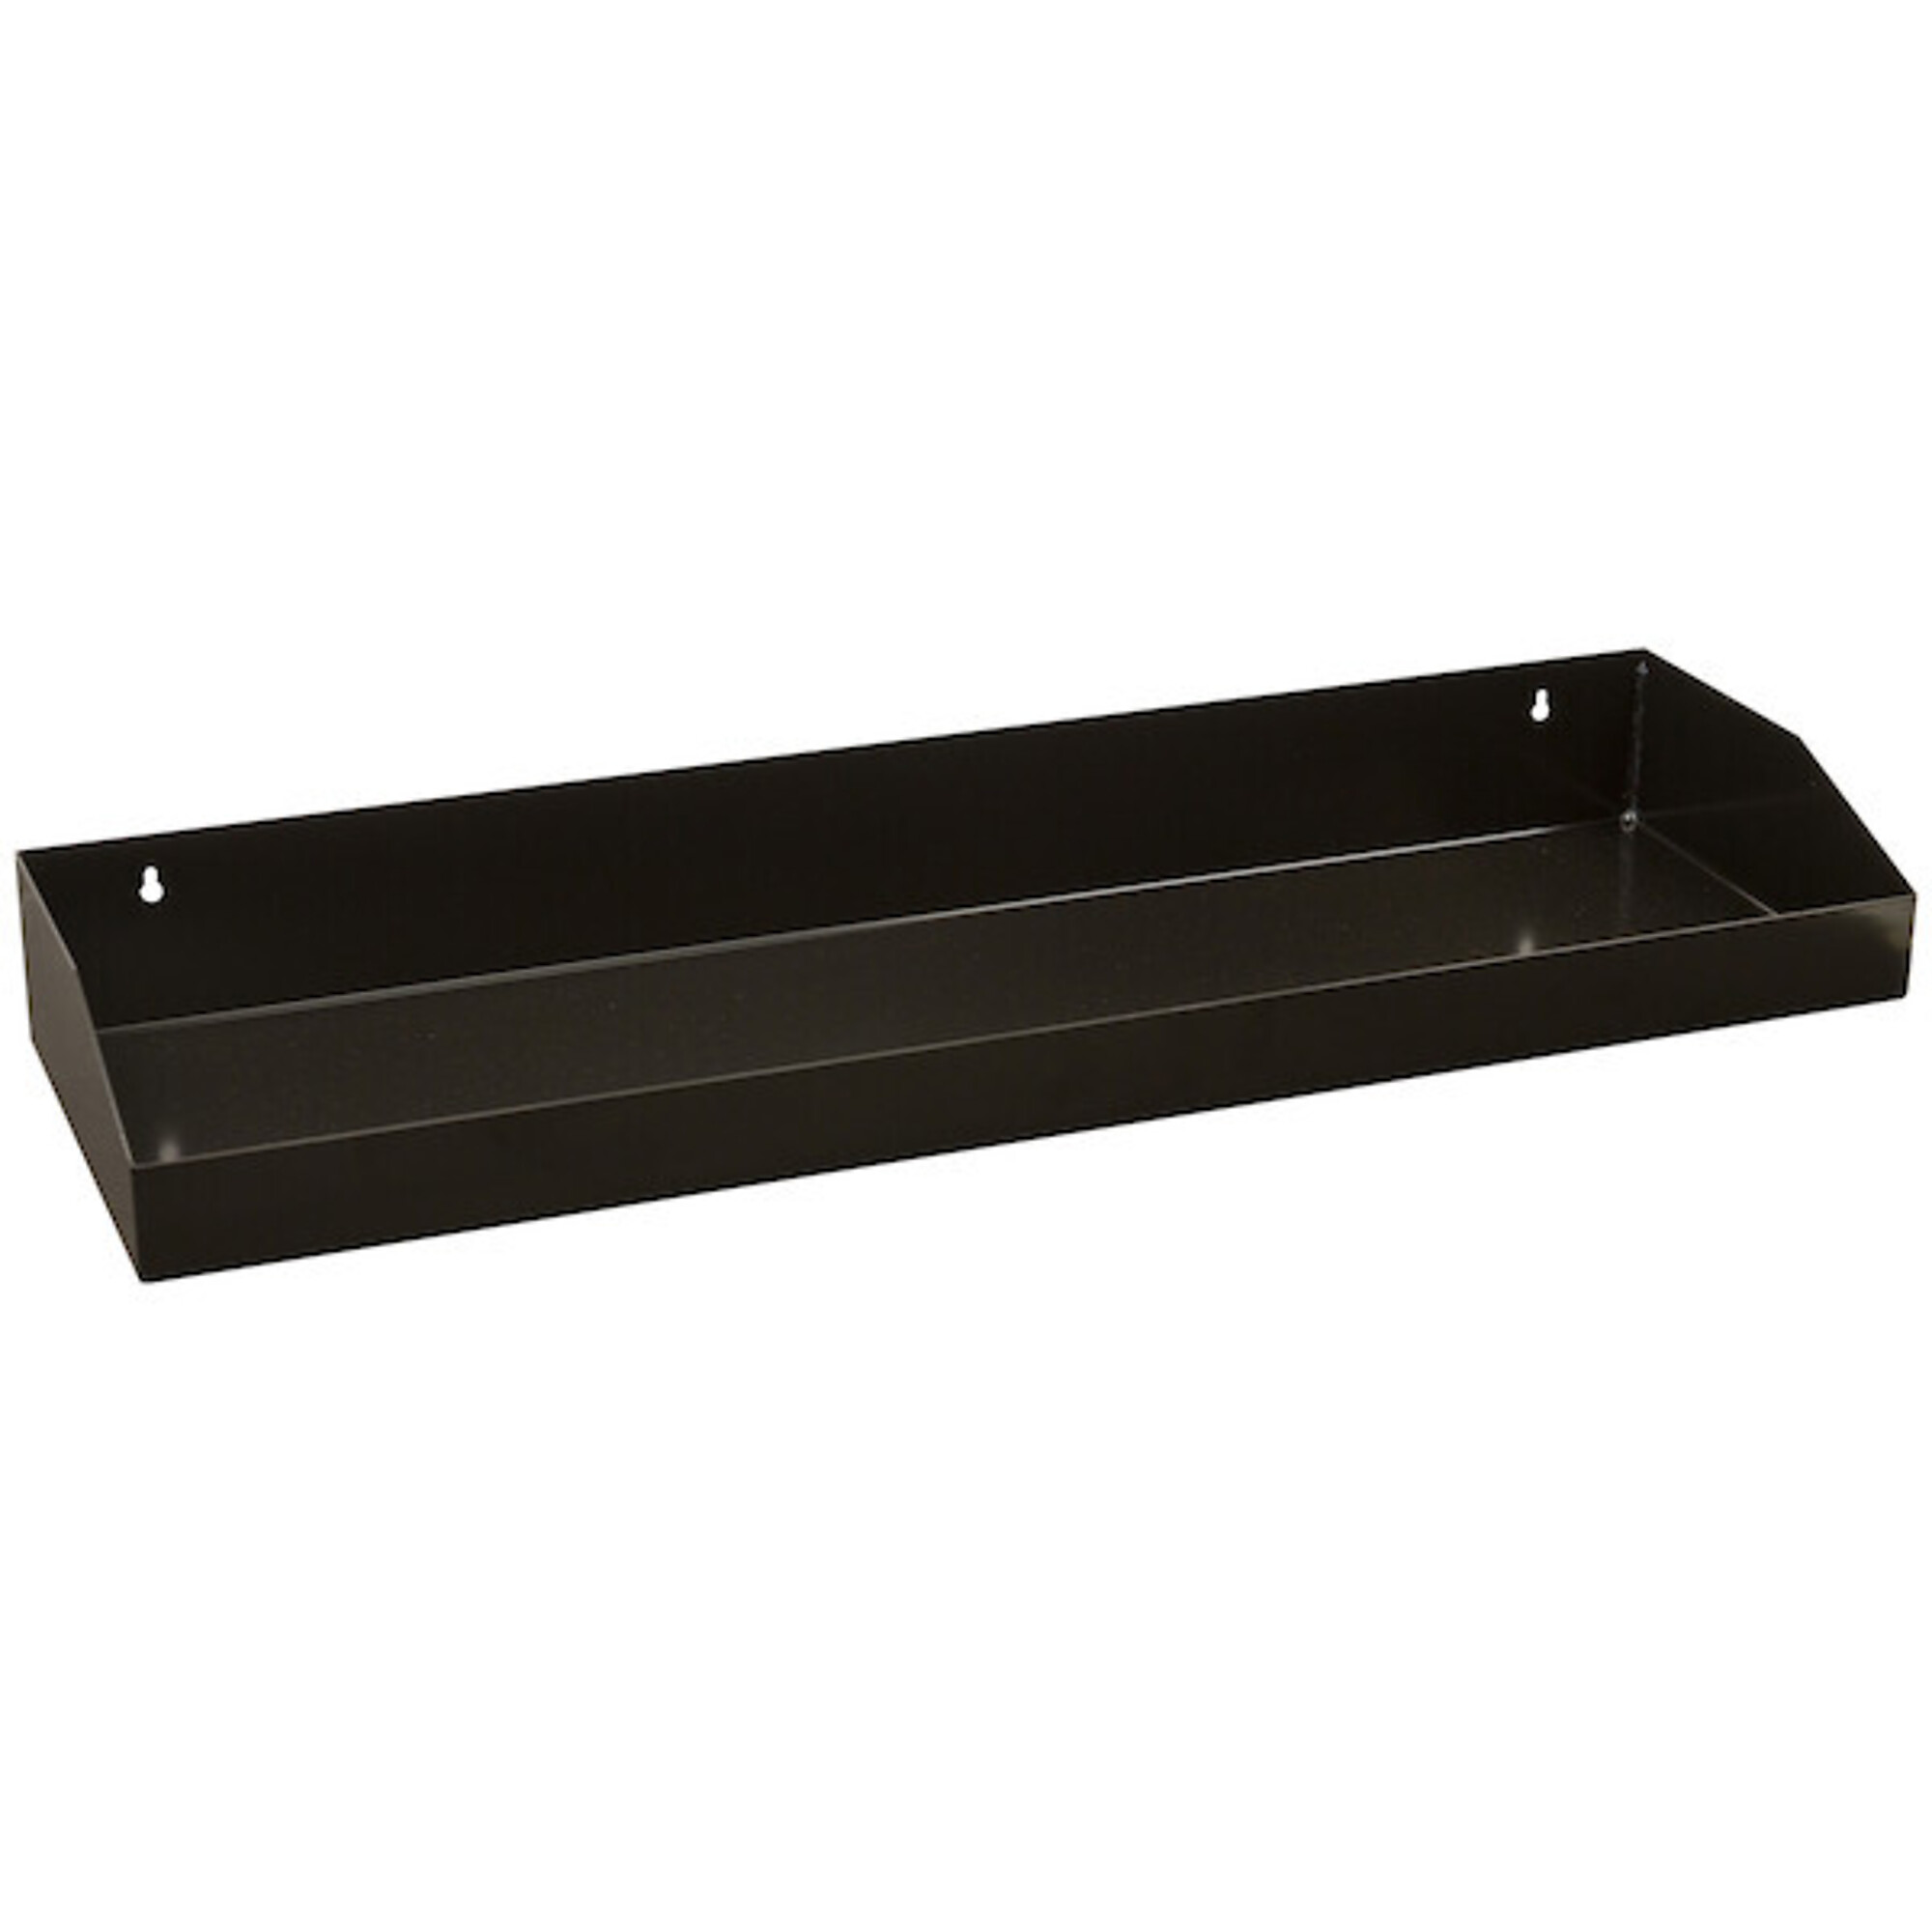 Buyers Products Cabinet Tray For Truck Box, 35Inch Carbon Steel, Glossy Black, Model 1702940TRAY